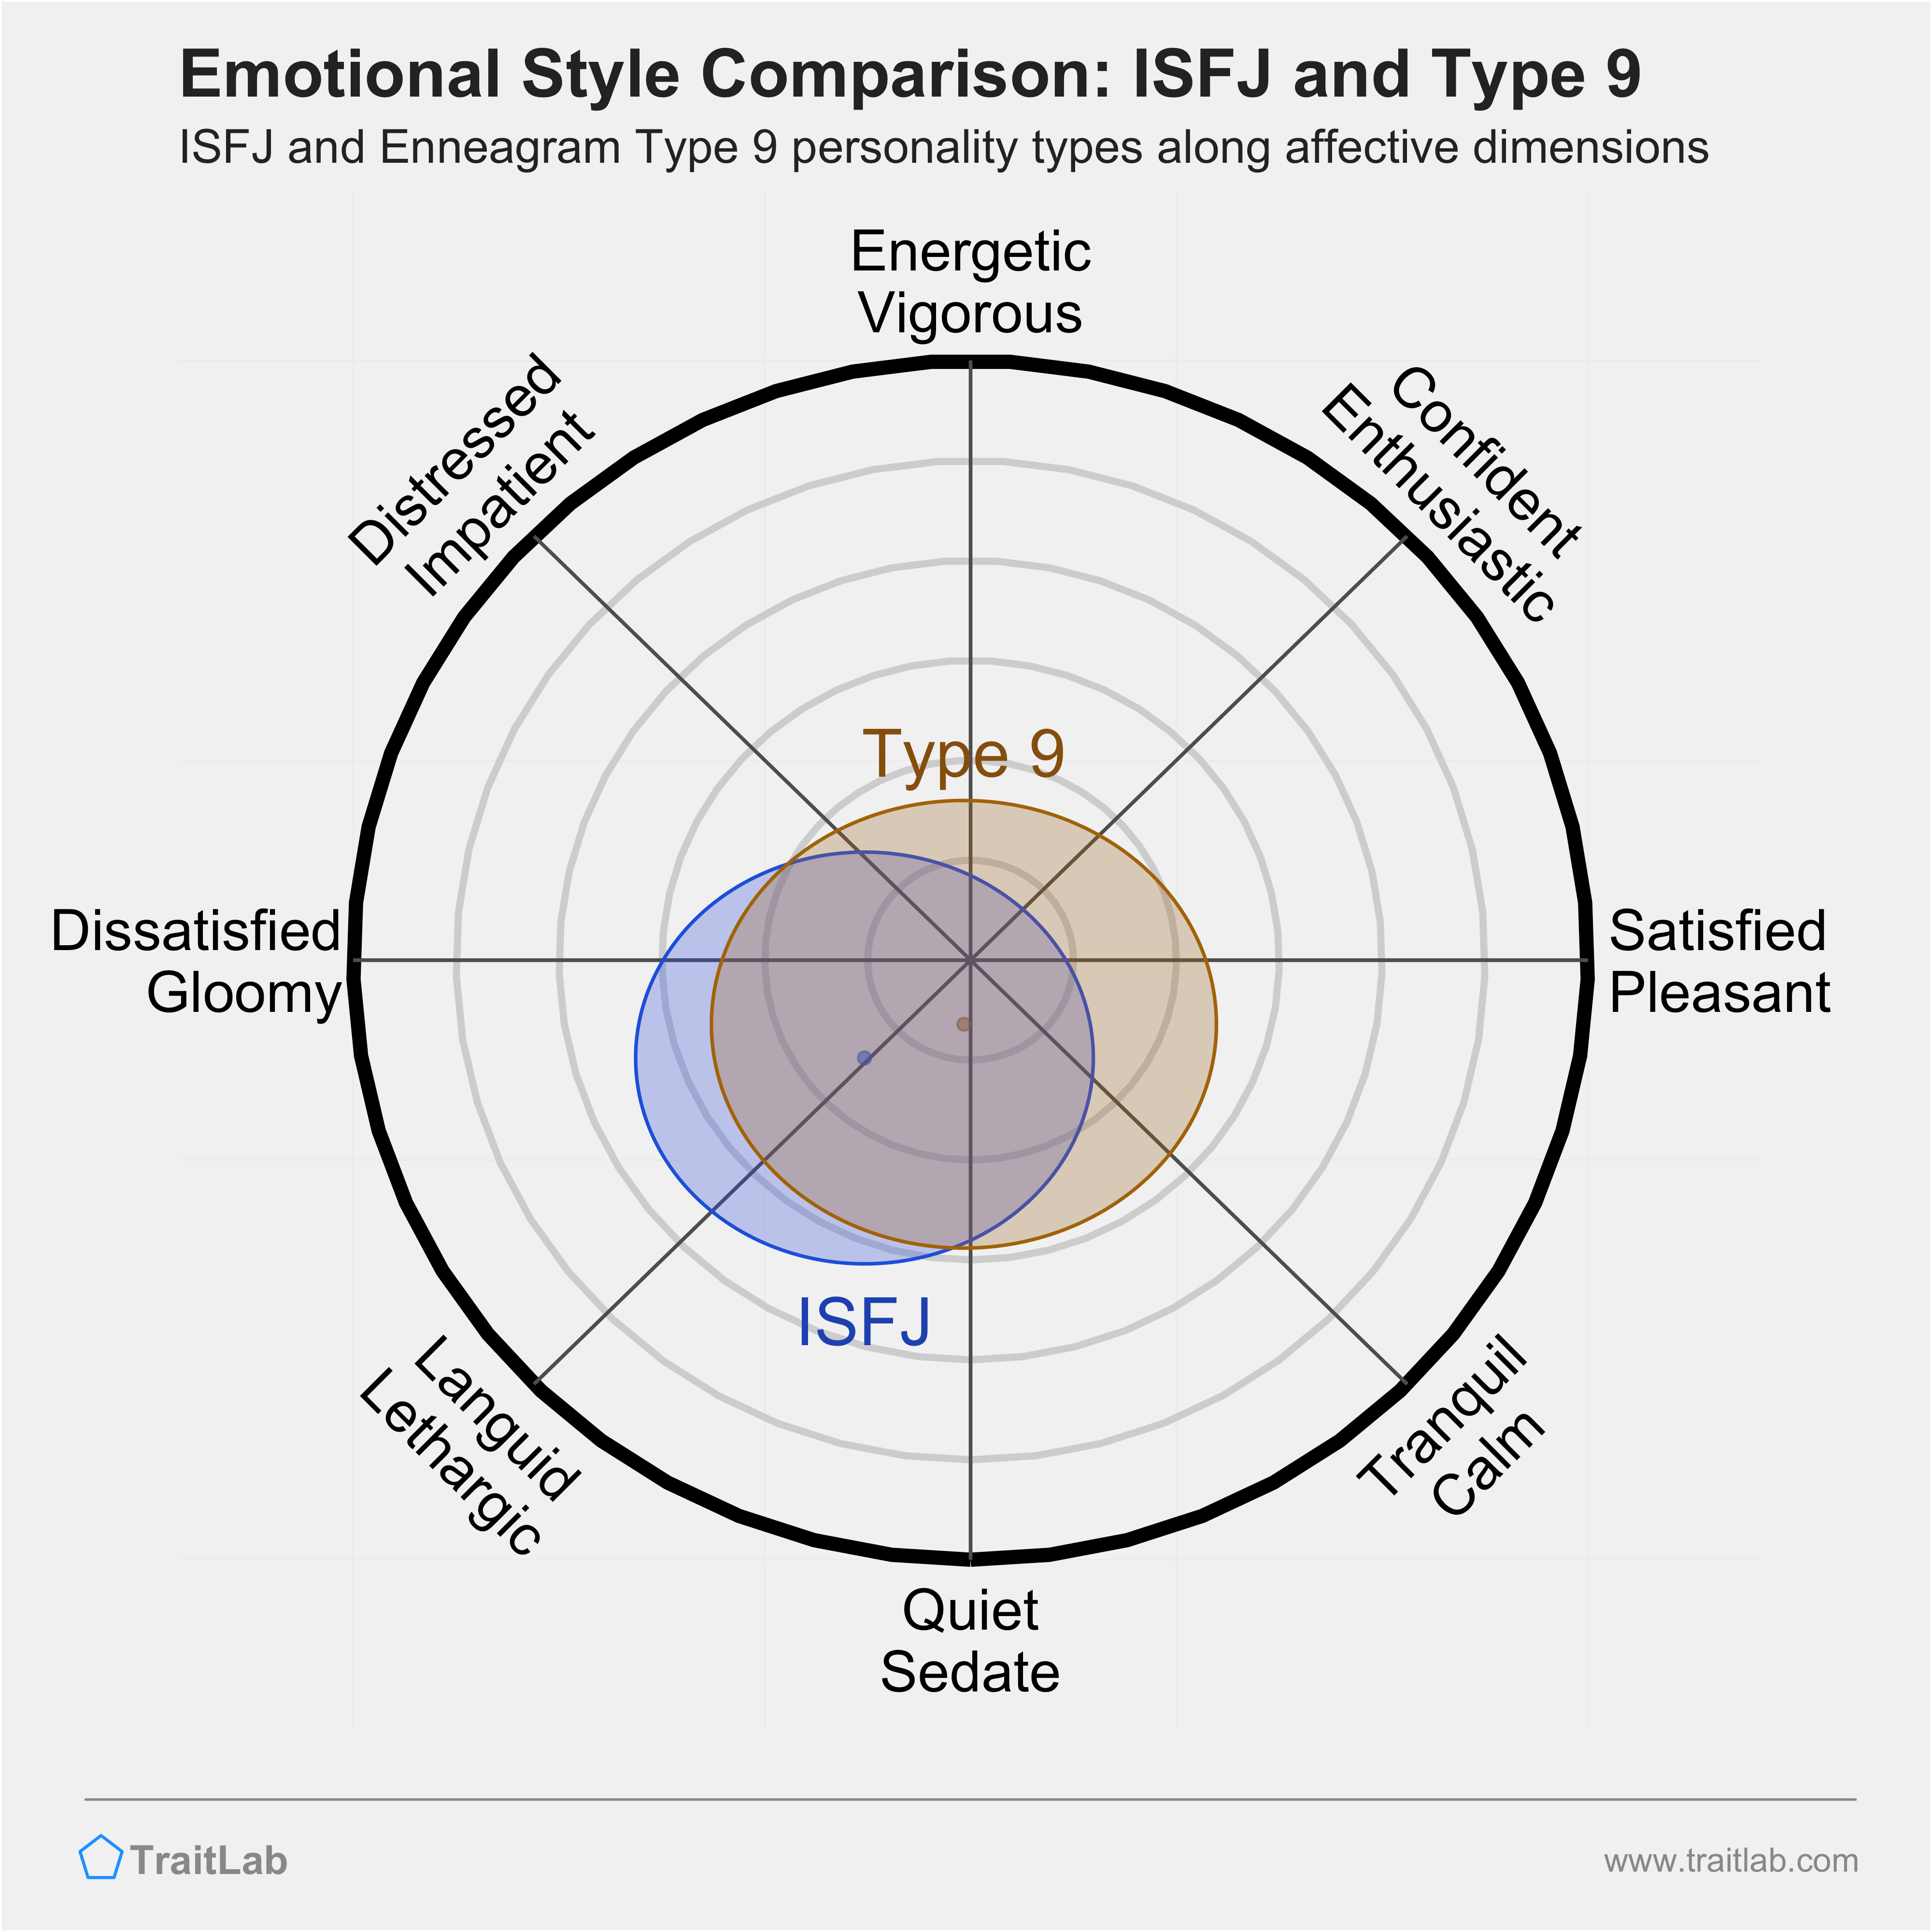 ISFJ and Type 9 comparison across emotional (affective) dimensions